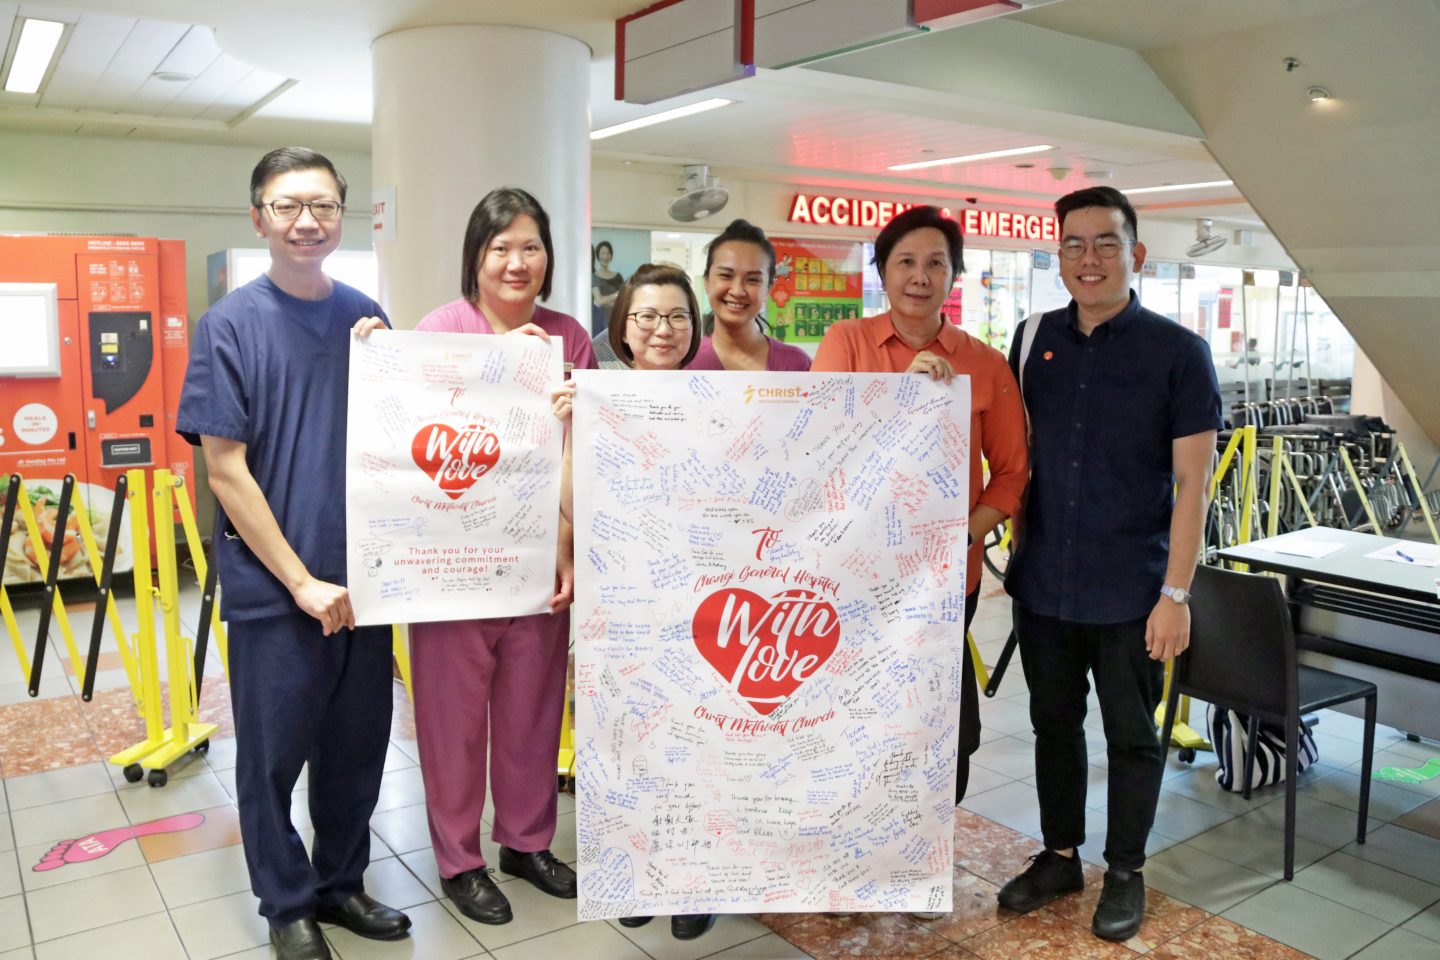 Dr Steven Lim, chief and senior consultant at CGH's A&E (far left) receiving posters of encouragement from Rev Dianna Khoo (second from right). Photo by Netania Pereira.